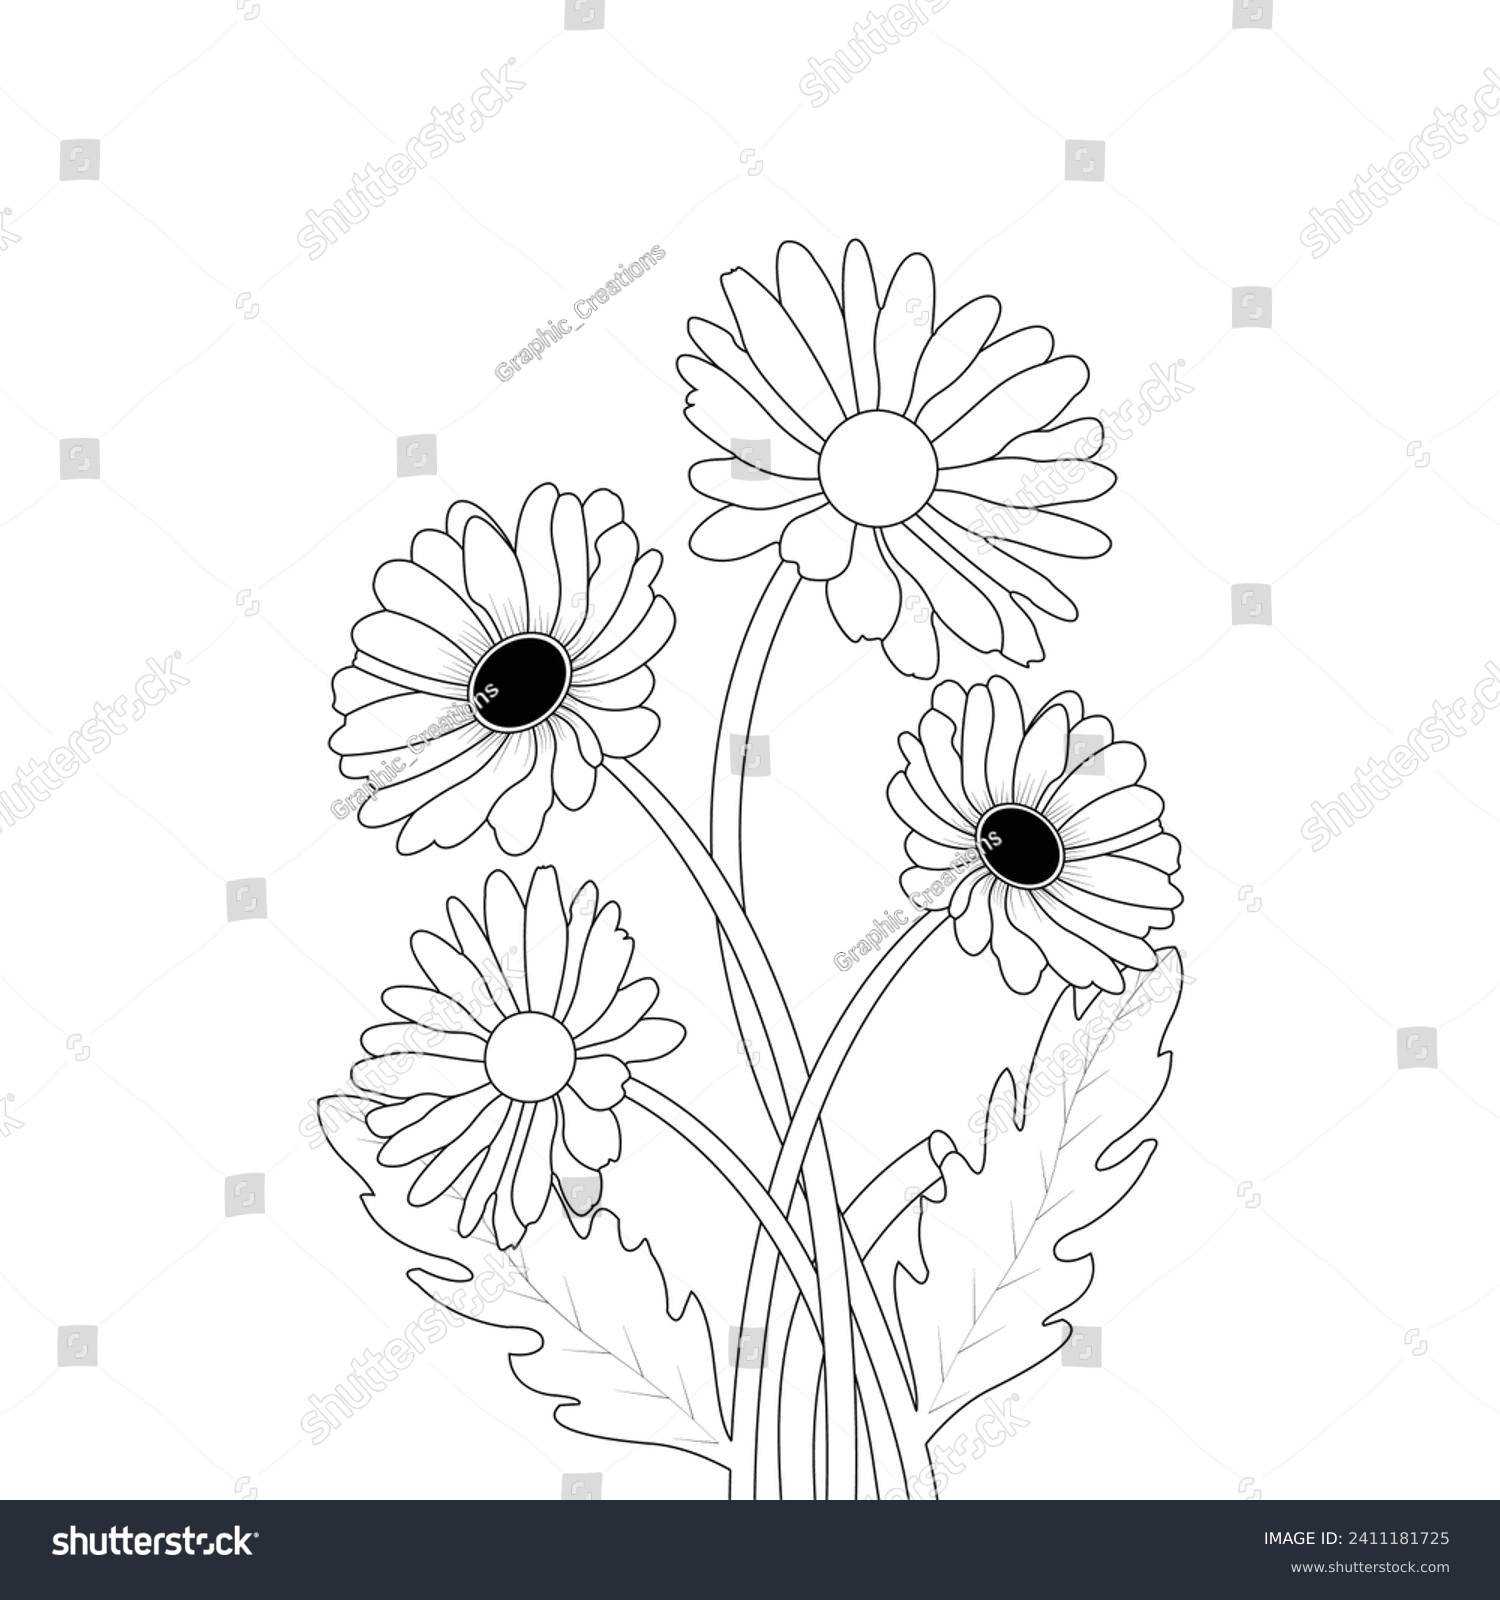 SVG of Daisy Line Art, Daisy Flower Outline Coloring Page vector illustration svg